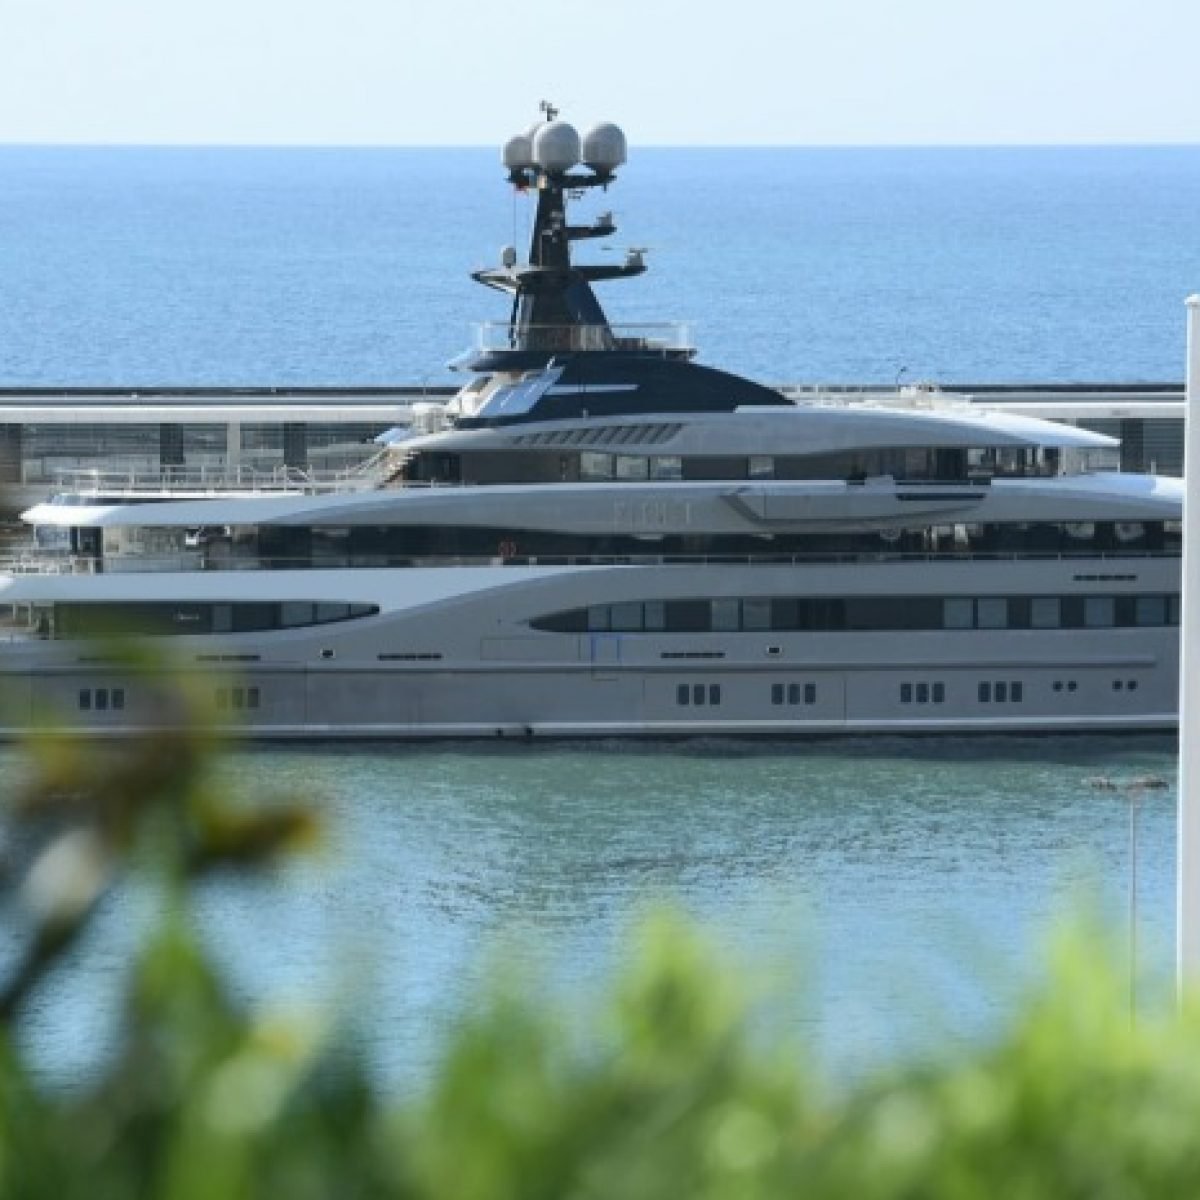 yachts in funchal